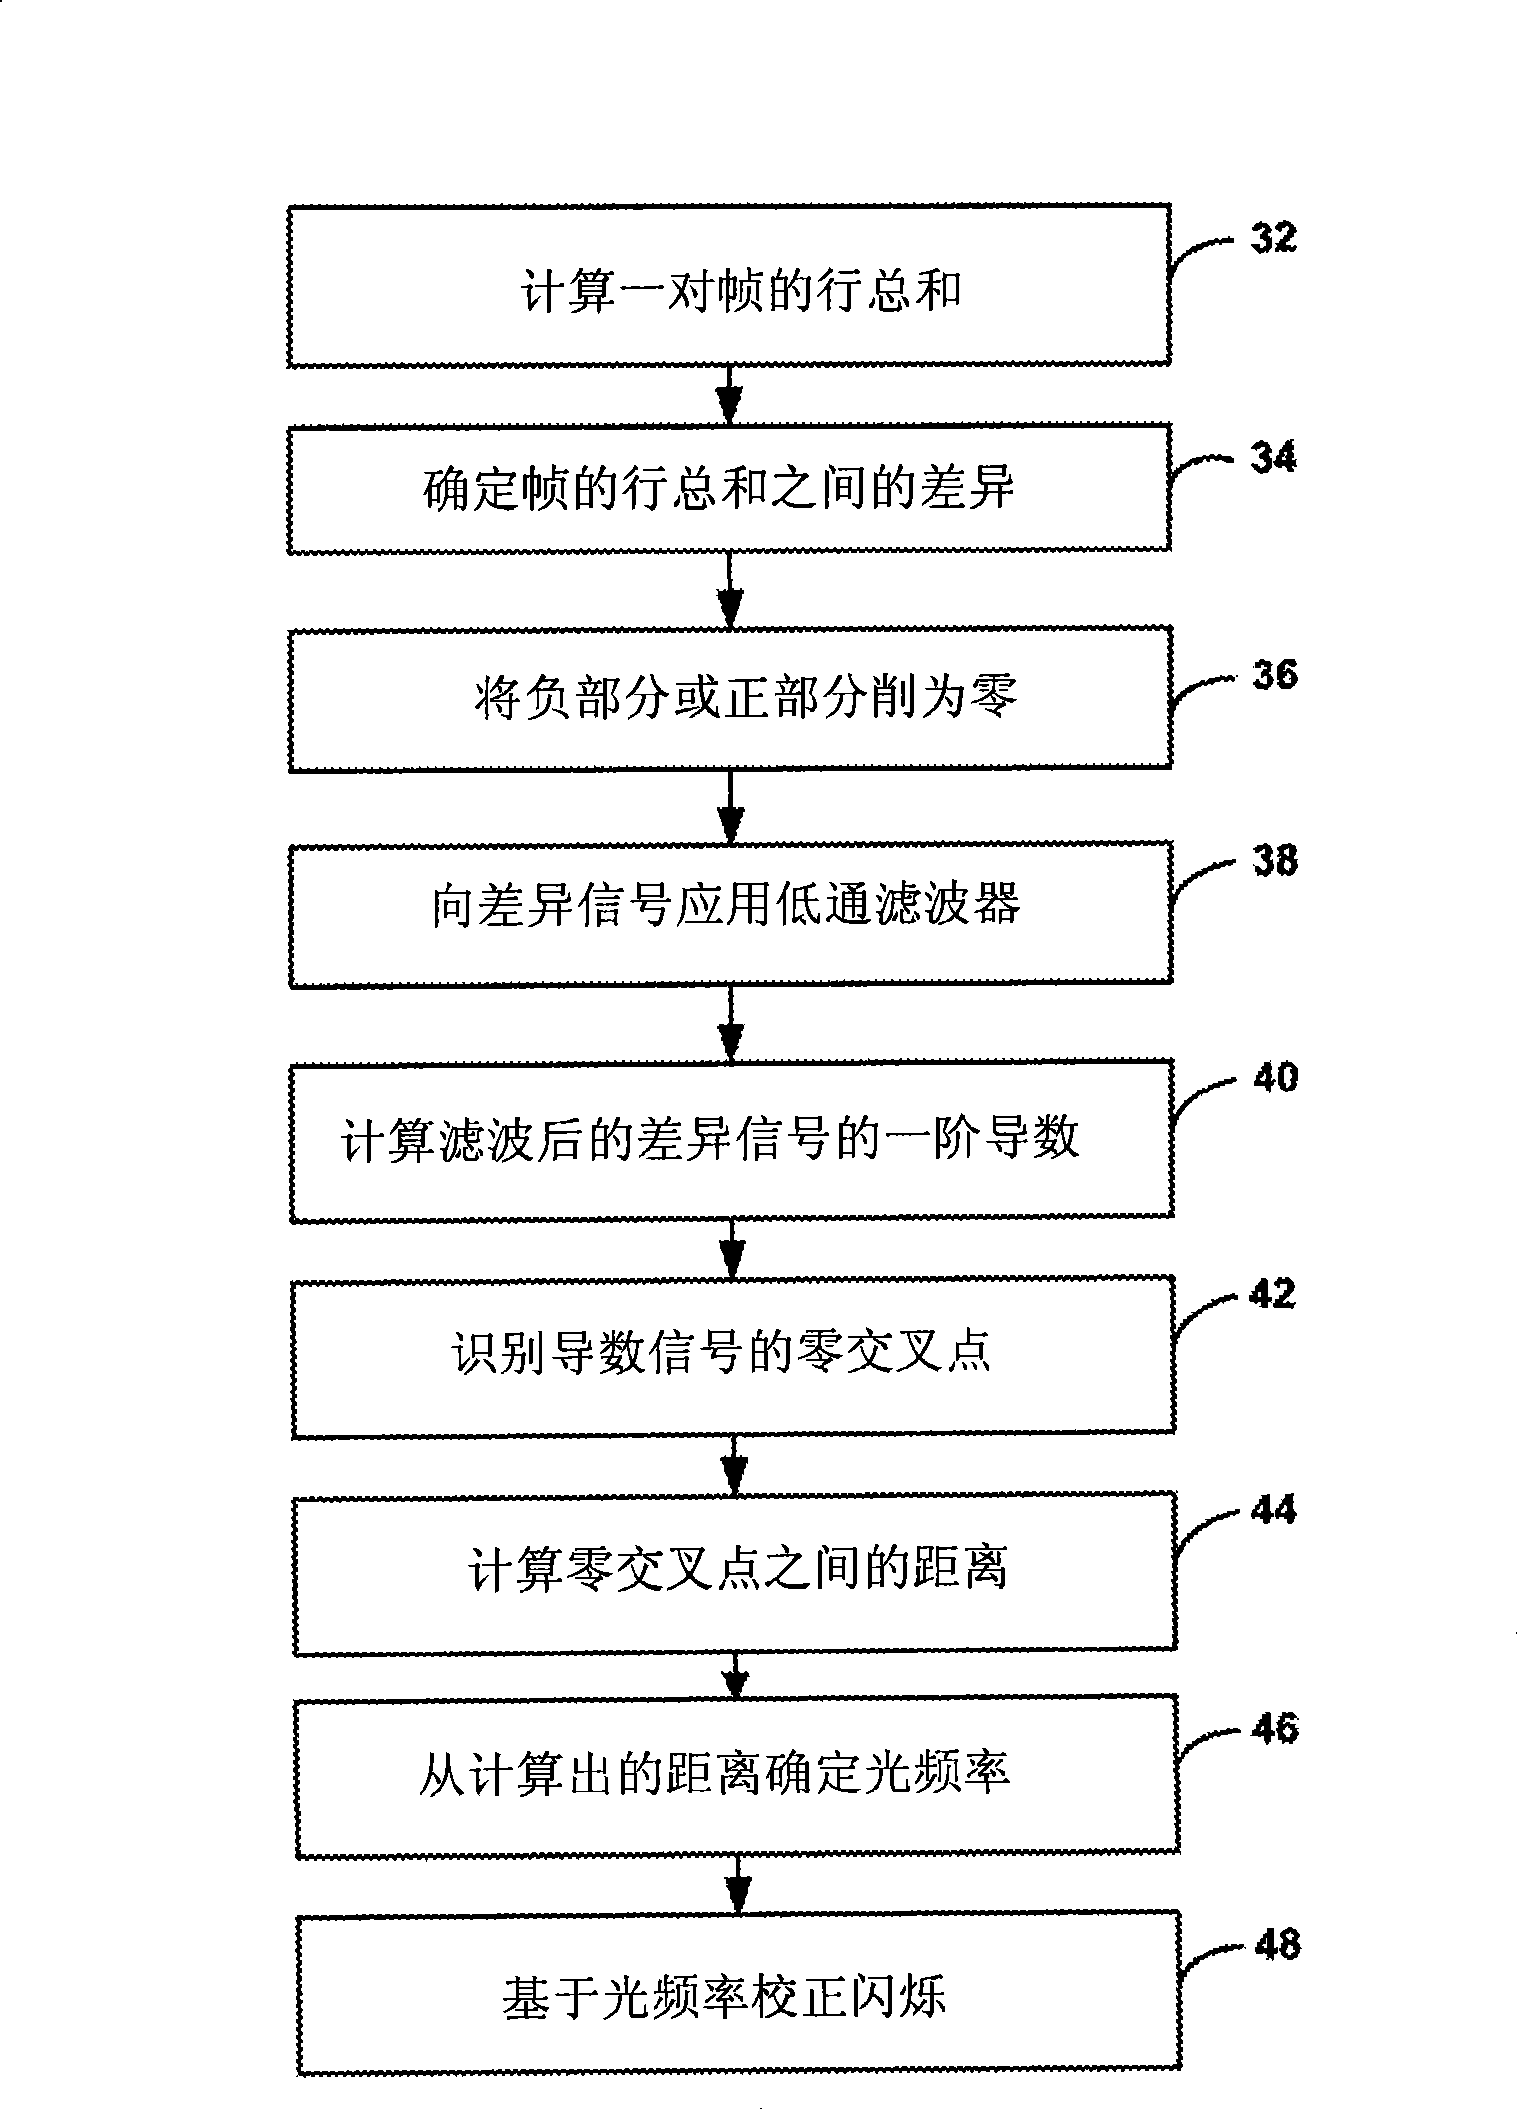 Automatic flicker correction in an image capture device